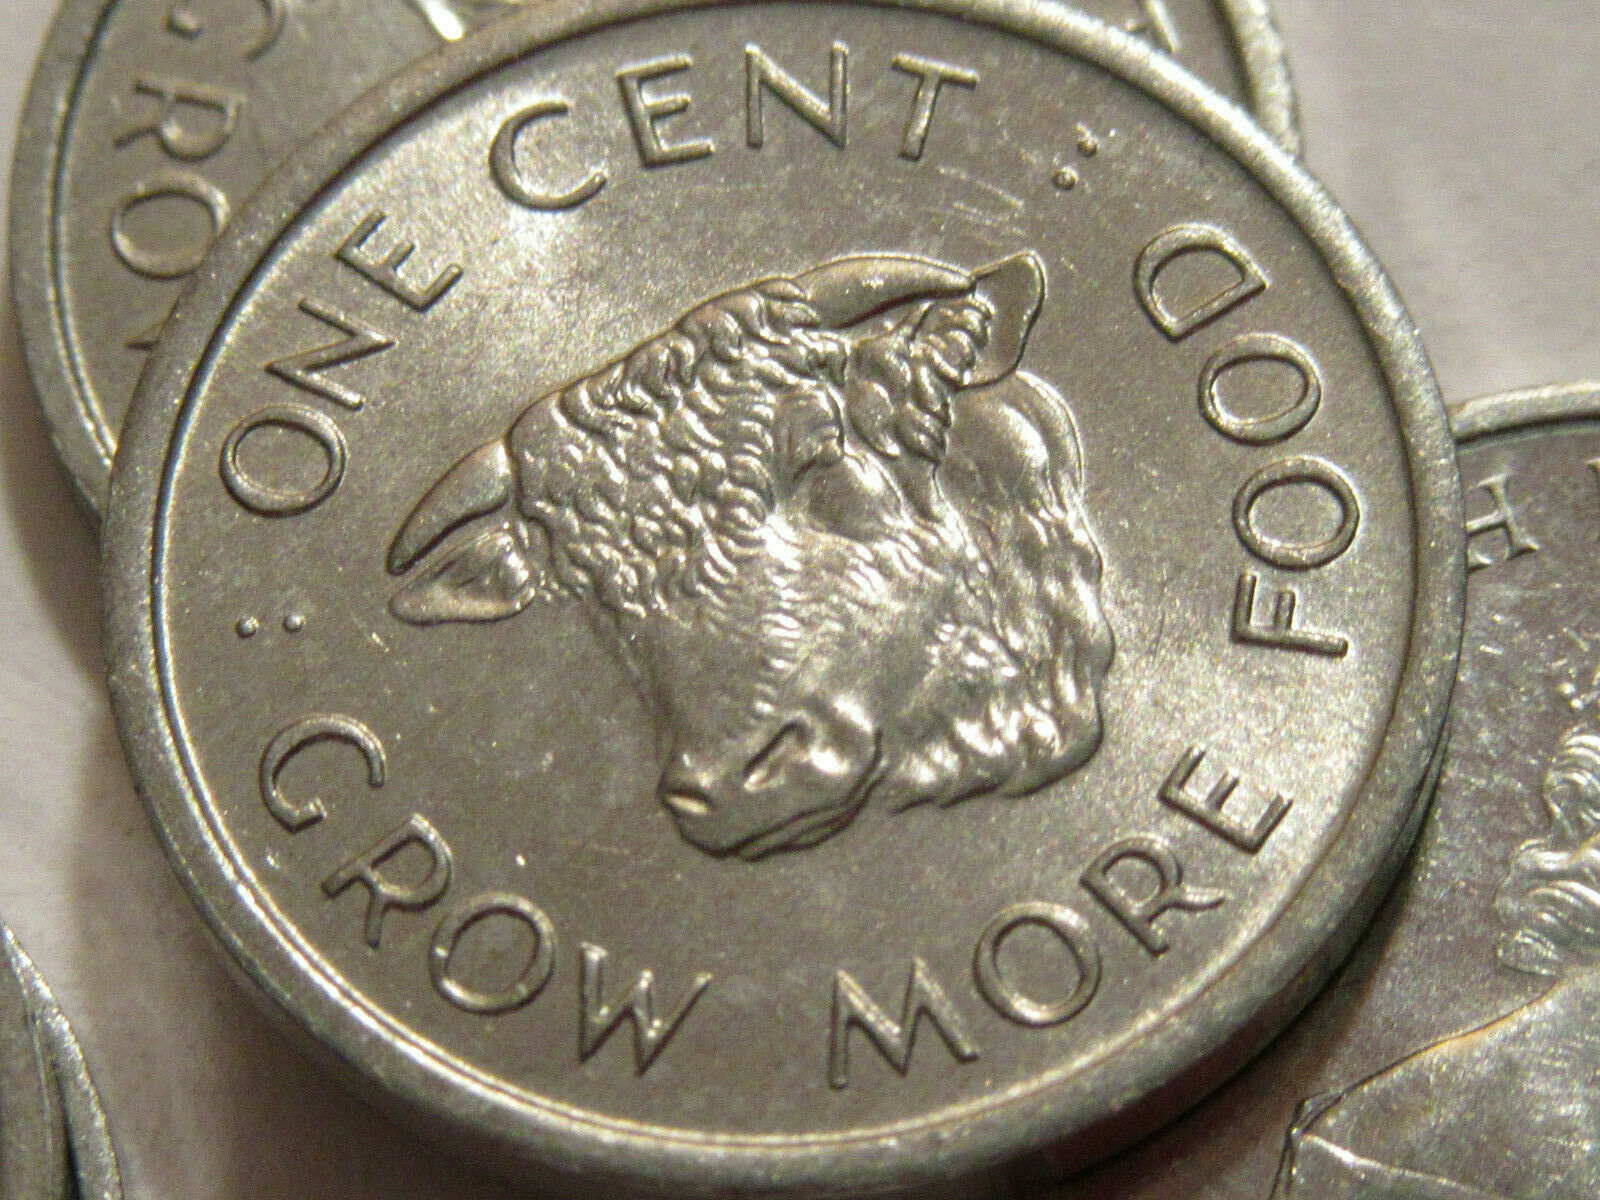 1972 Seychelles coin 1 cent  COW  sweet little coin uncirculated  FAO issue